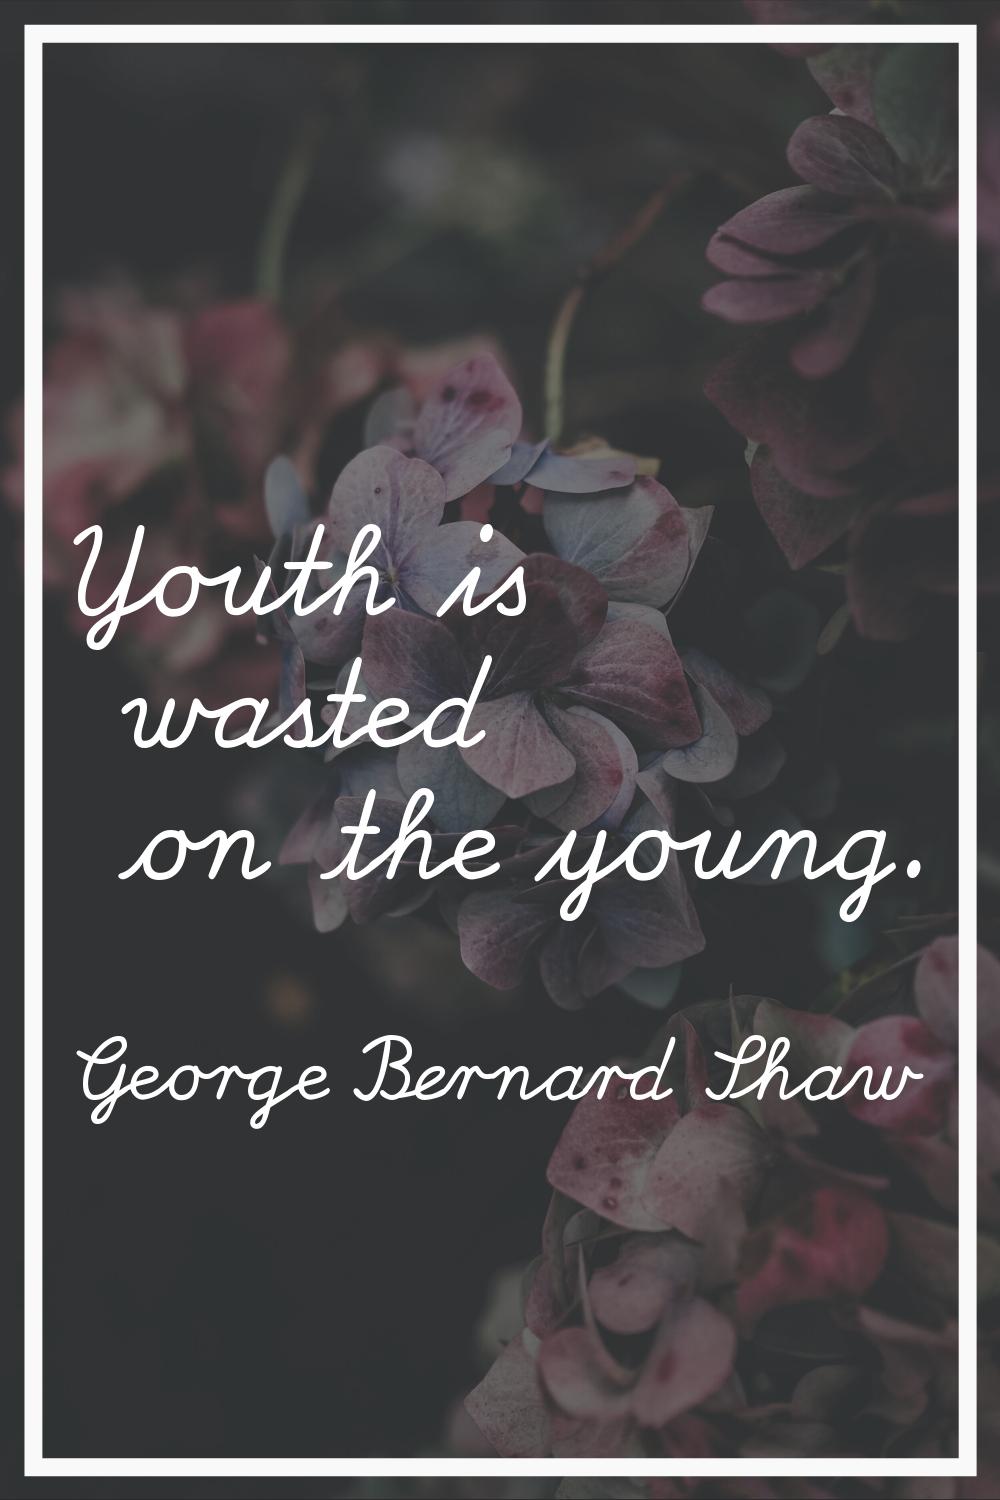 Youth is wasted on the young.